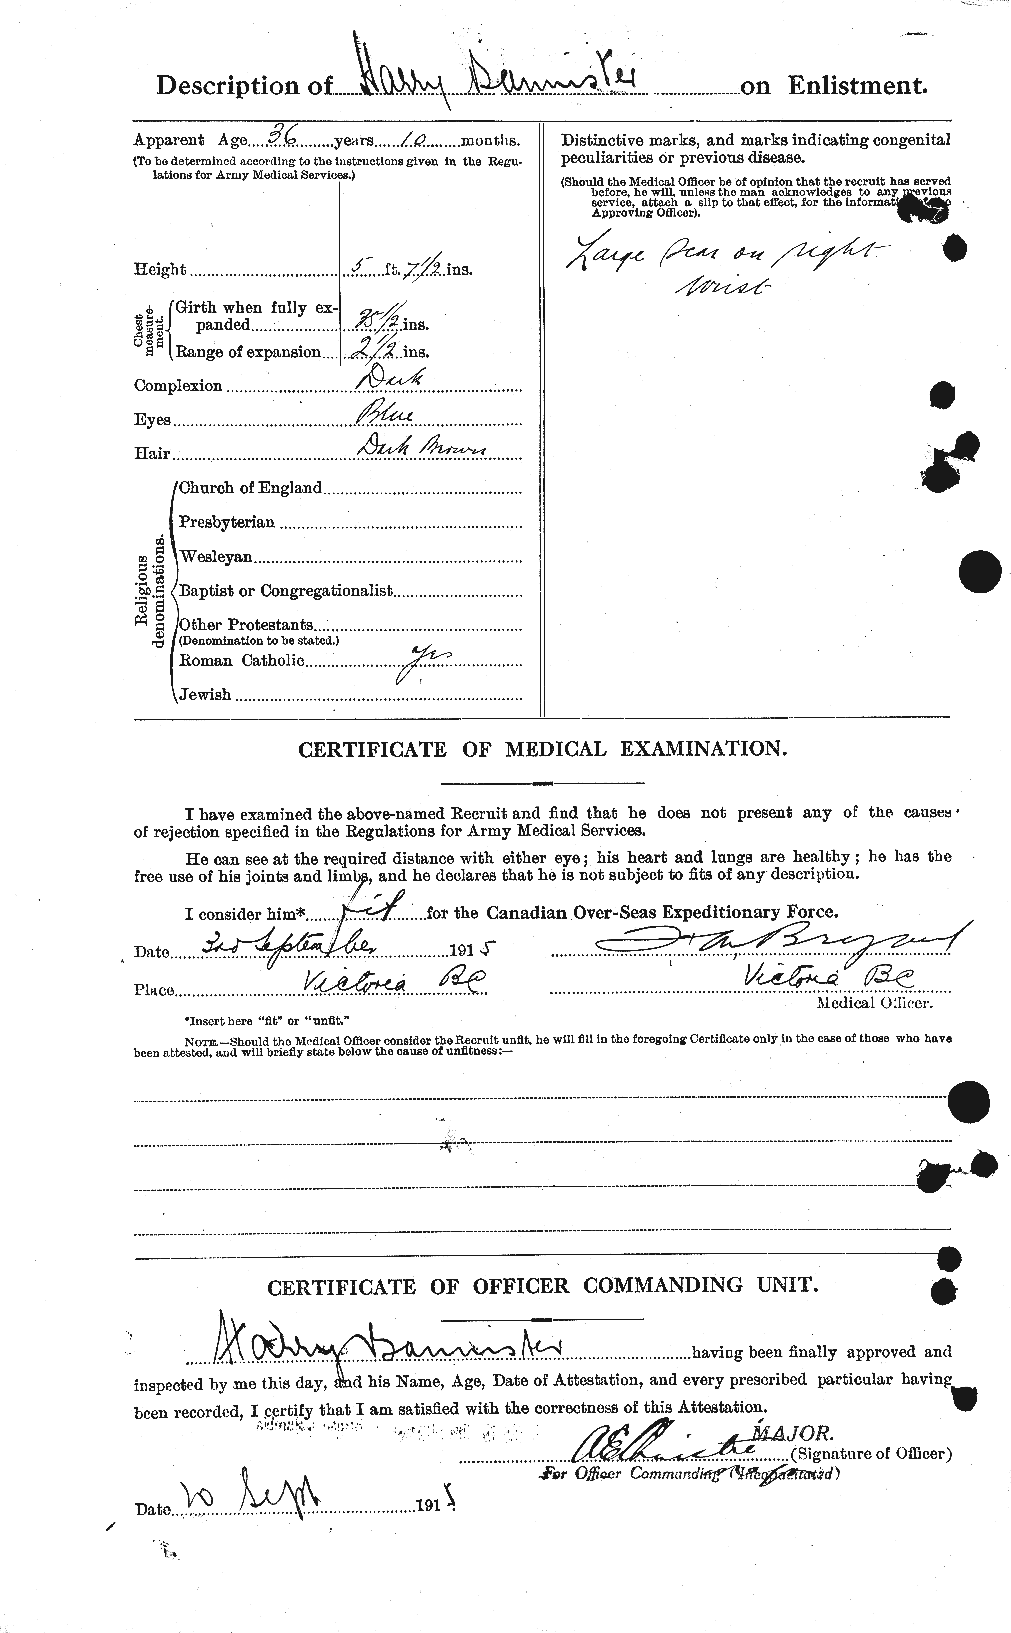 Personnel Records of the First World War - CEF 224792b